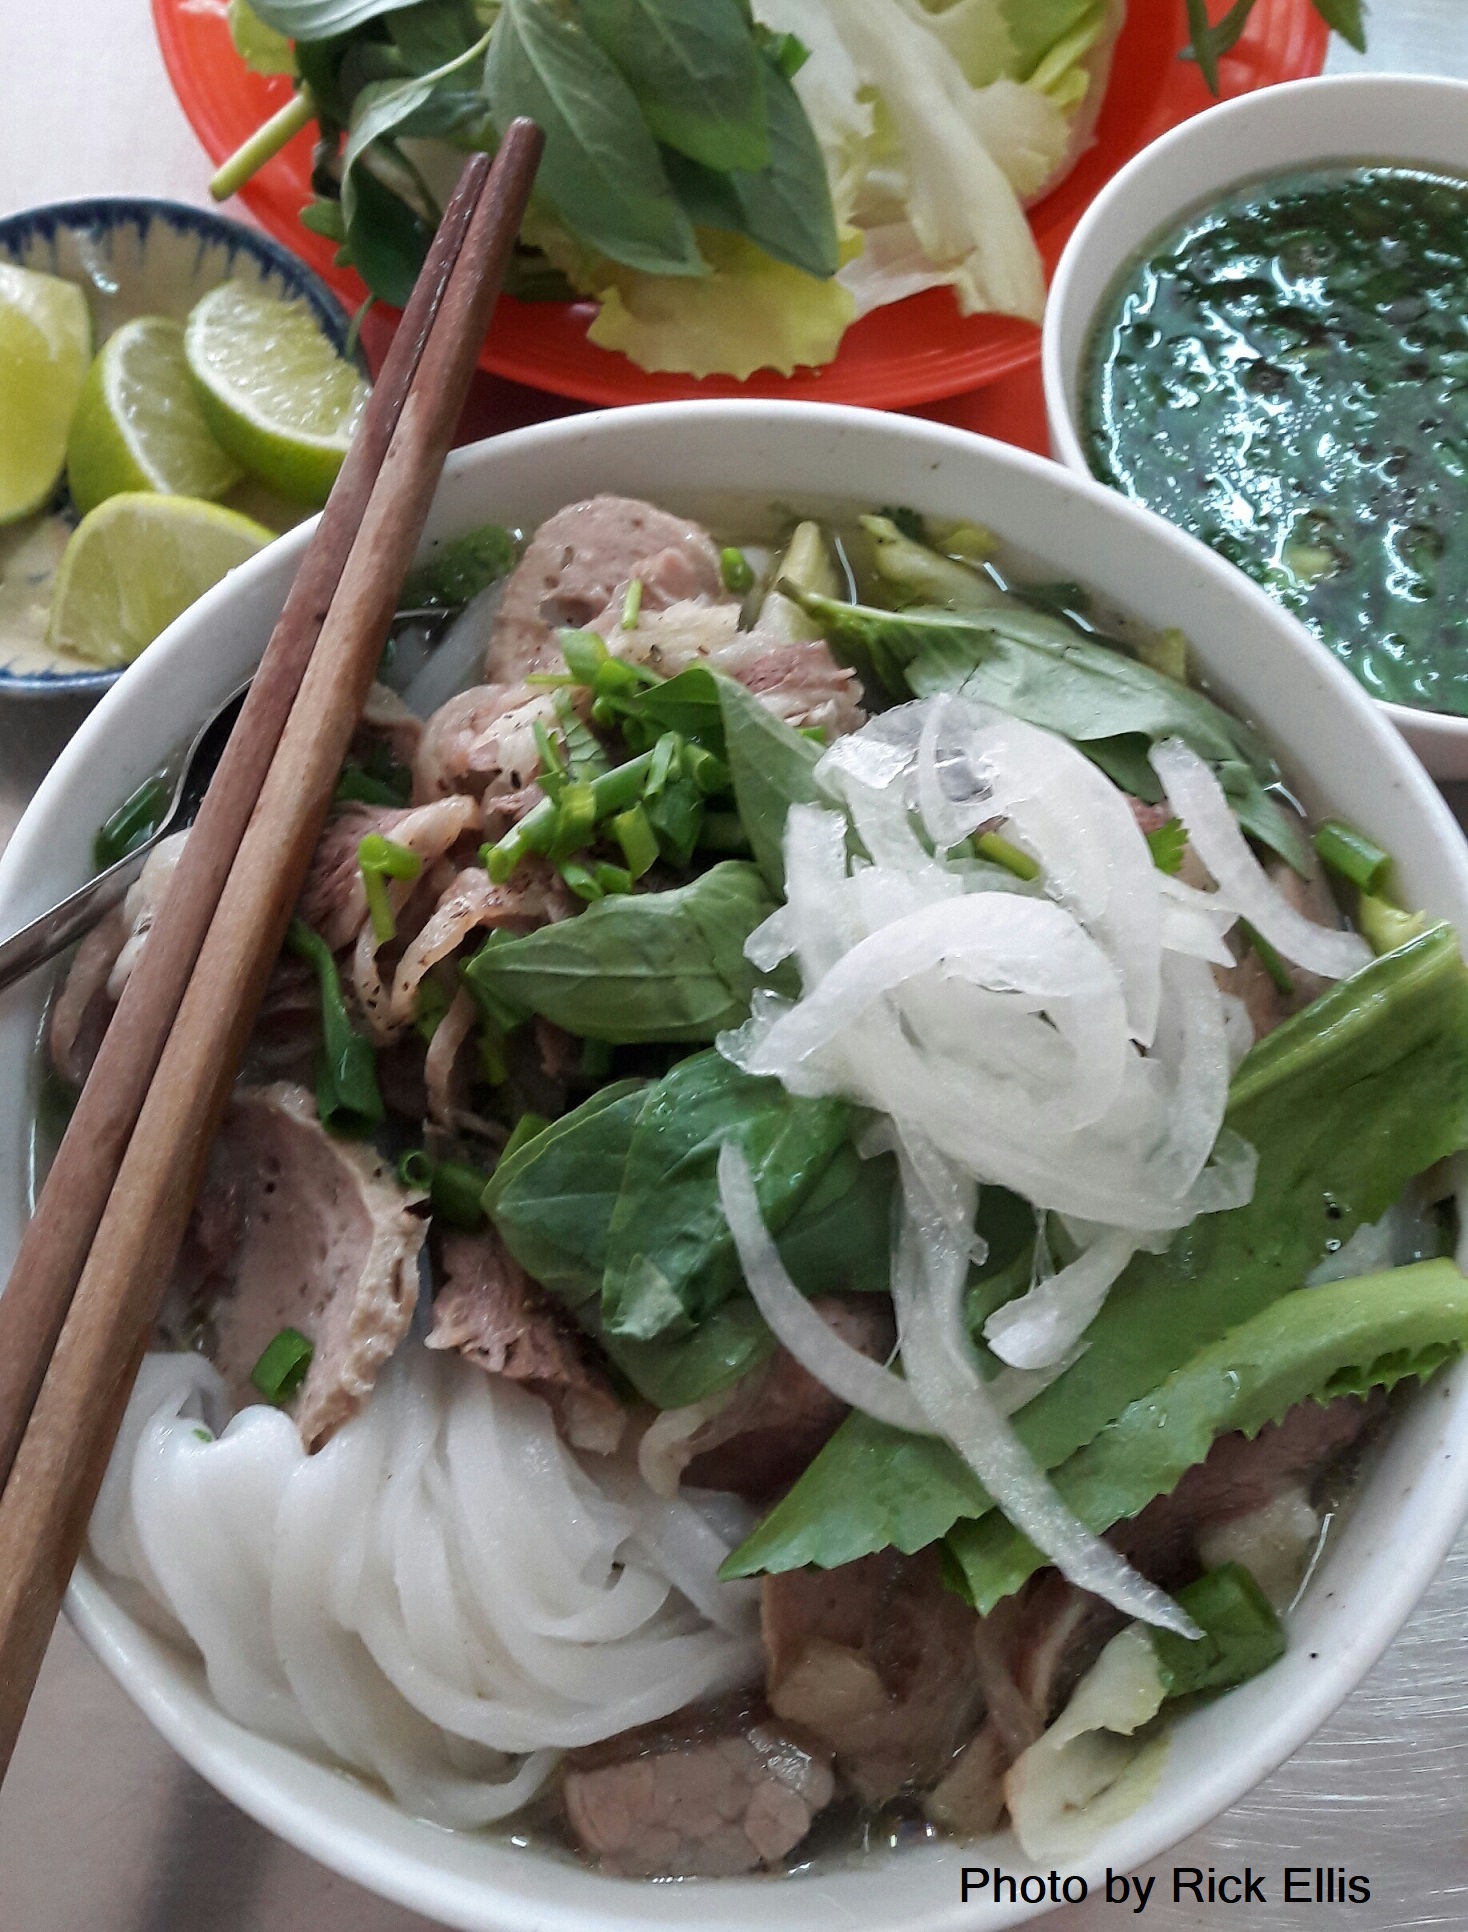 A hearty bowl of pho with the fixings